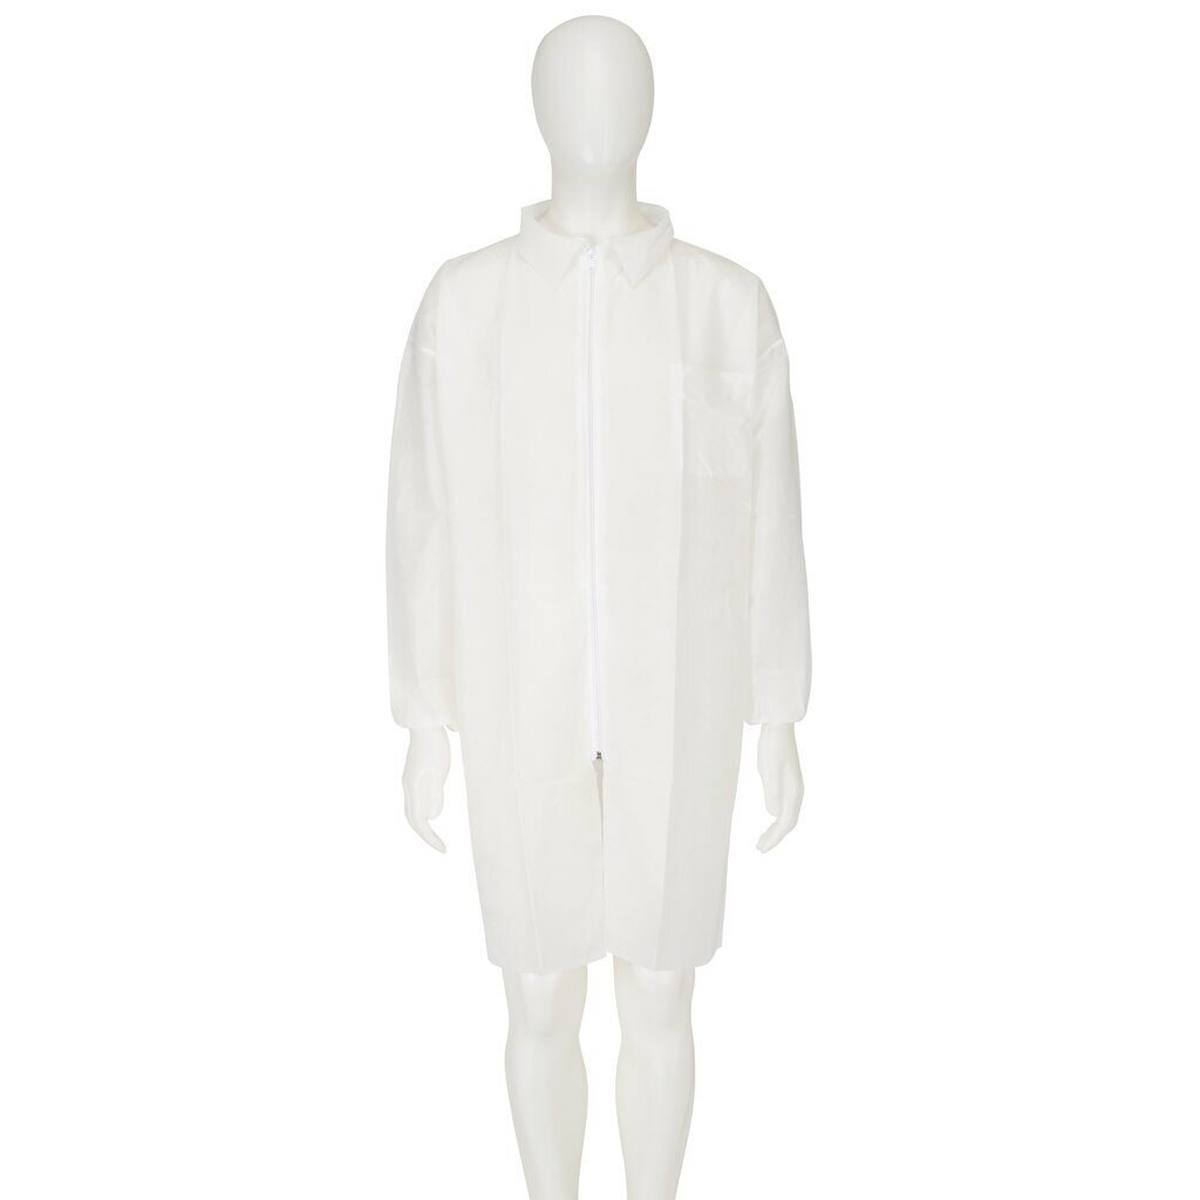 3M 4400 Coat, white, size L, material 100% polypropylene, breathable, very light, with zip fastener